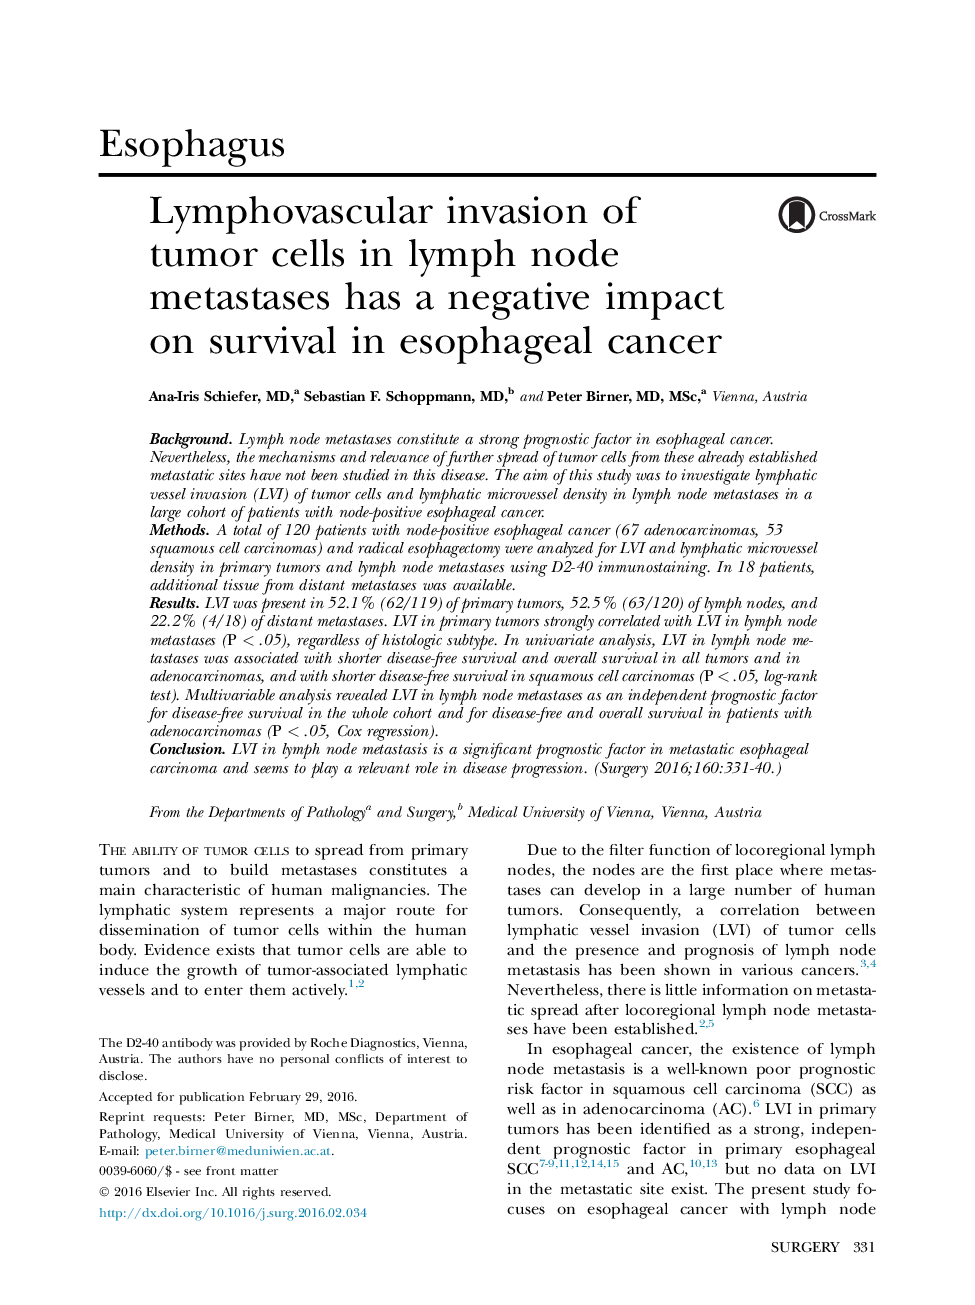 EsophagusLymphovascular invasion of tumor cells in lymph node metastases has a negative impact on survival in esophageal cancer